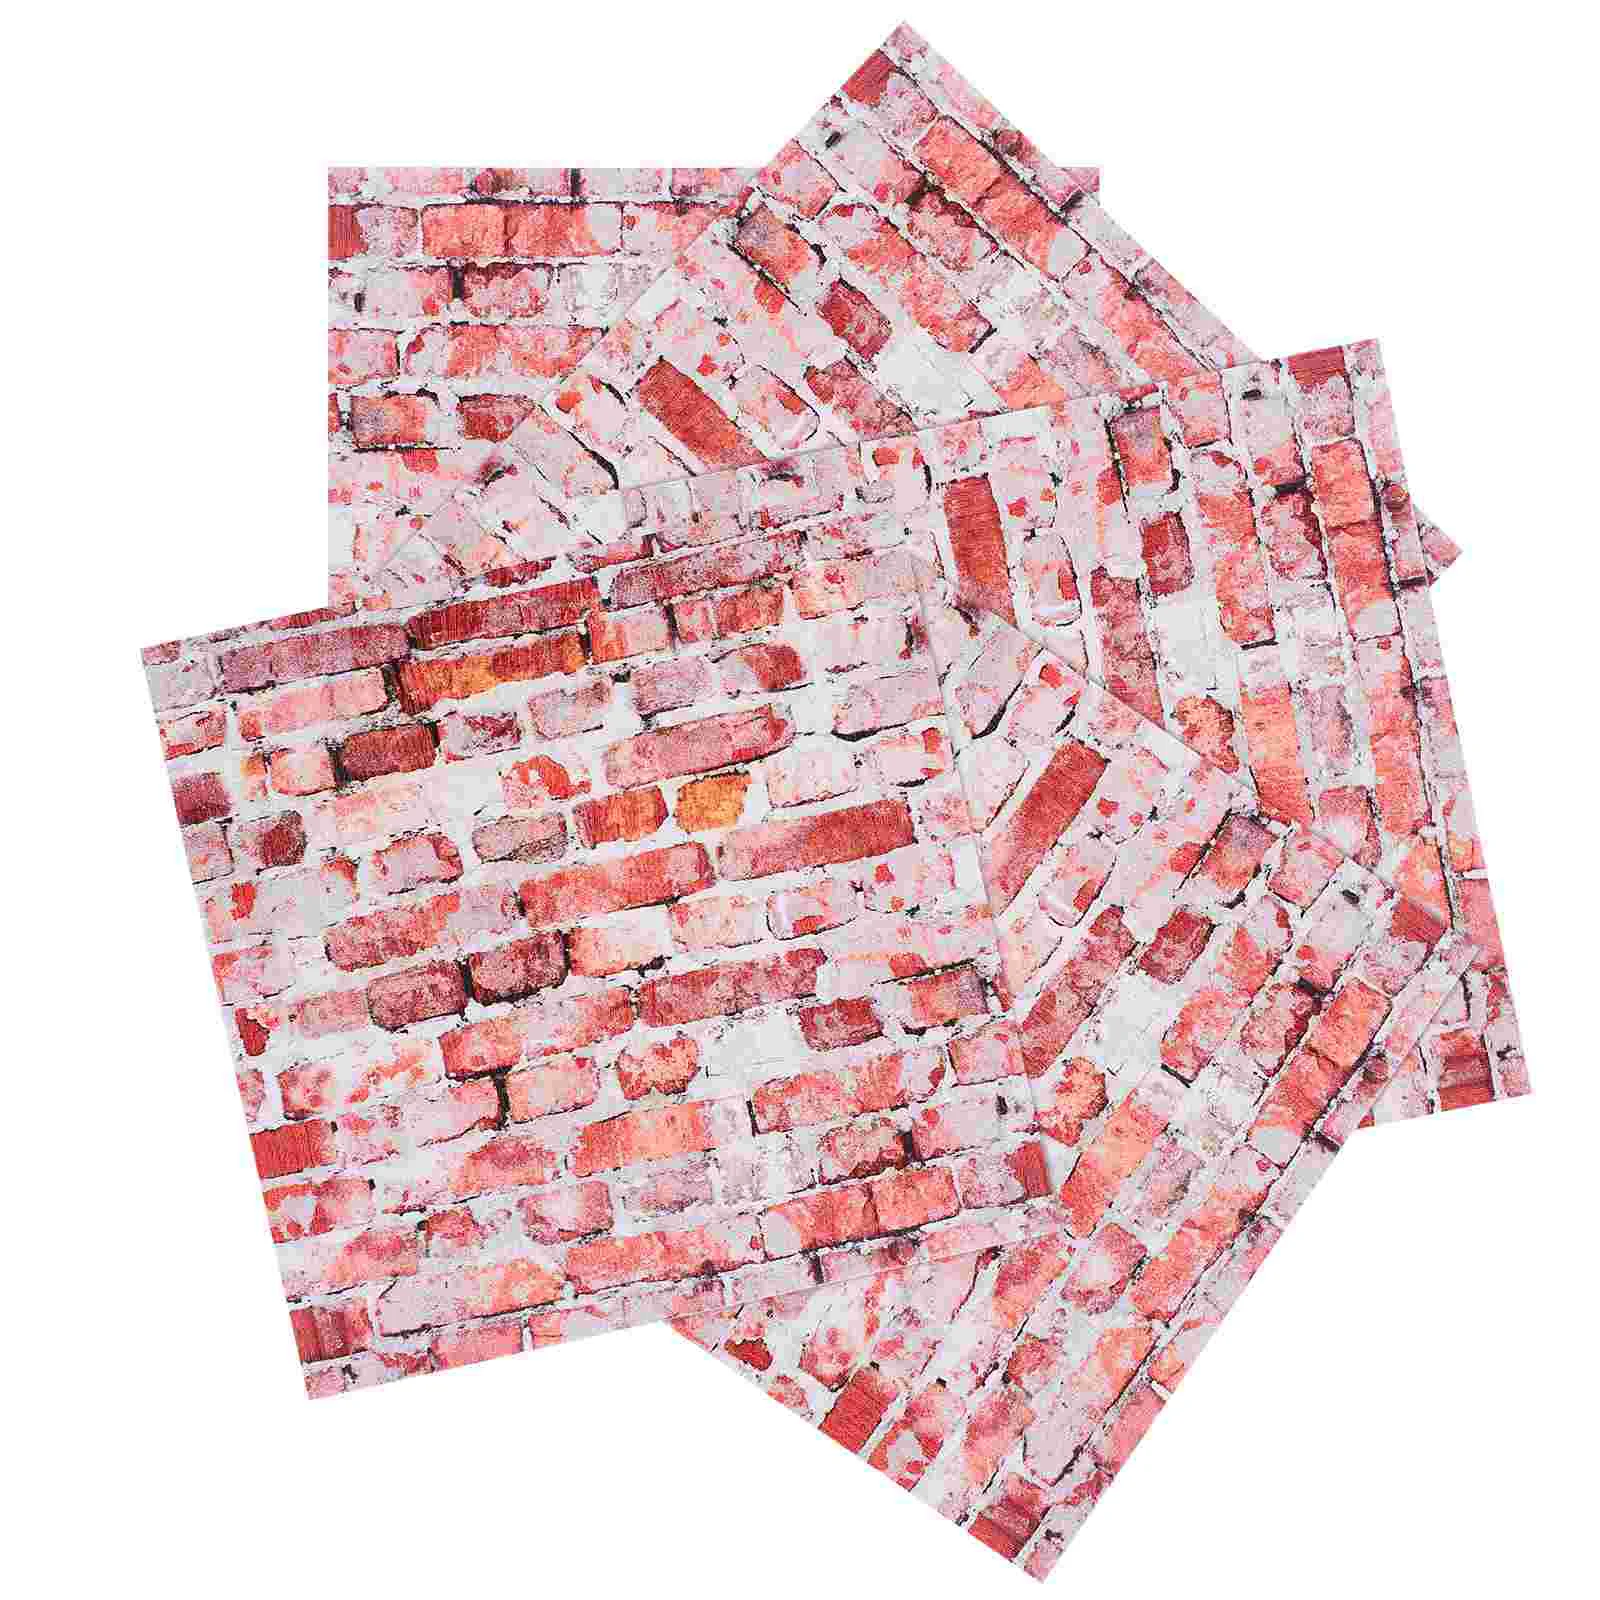 5 Pcs House Tile Wall Sticker Mini Paper Peel and Miniature Accessories Wallpaper Stickers Decor wellyu new antique chinese classical red brick wallpaper papel de parede tile brick tea house foot bath hotel project wallpapers